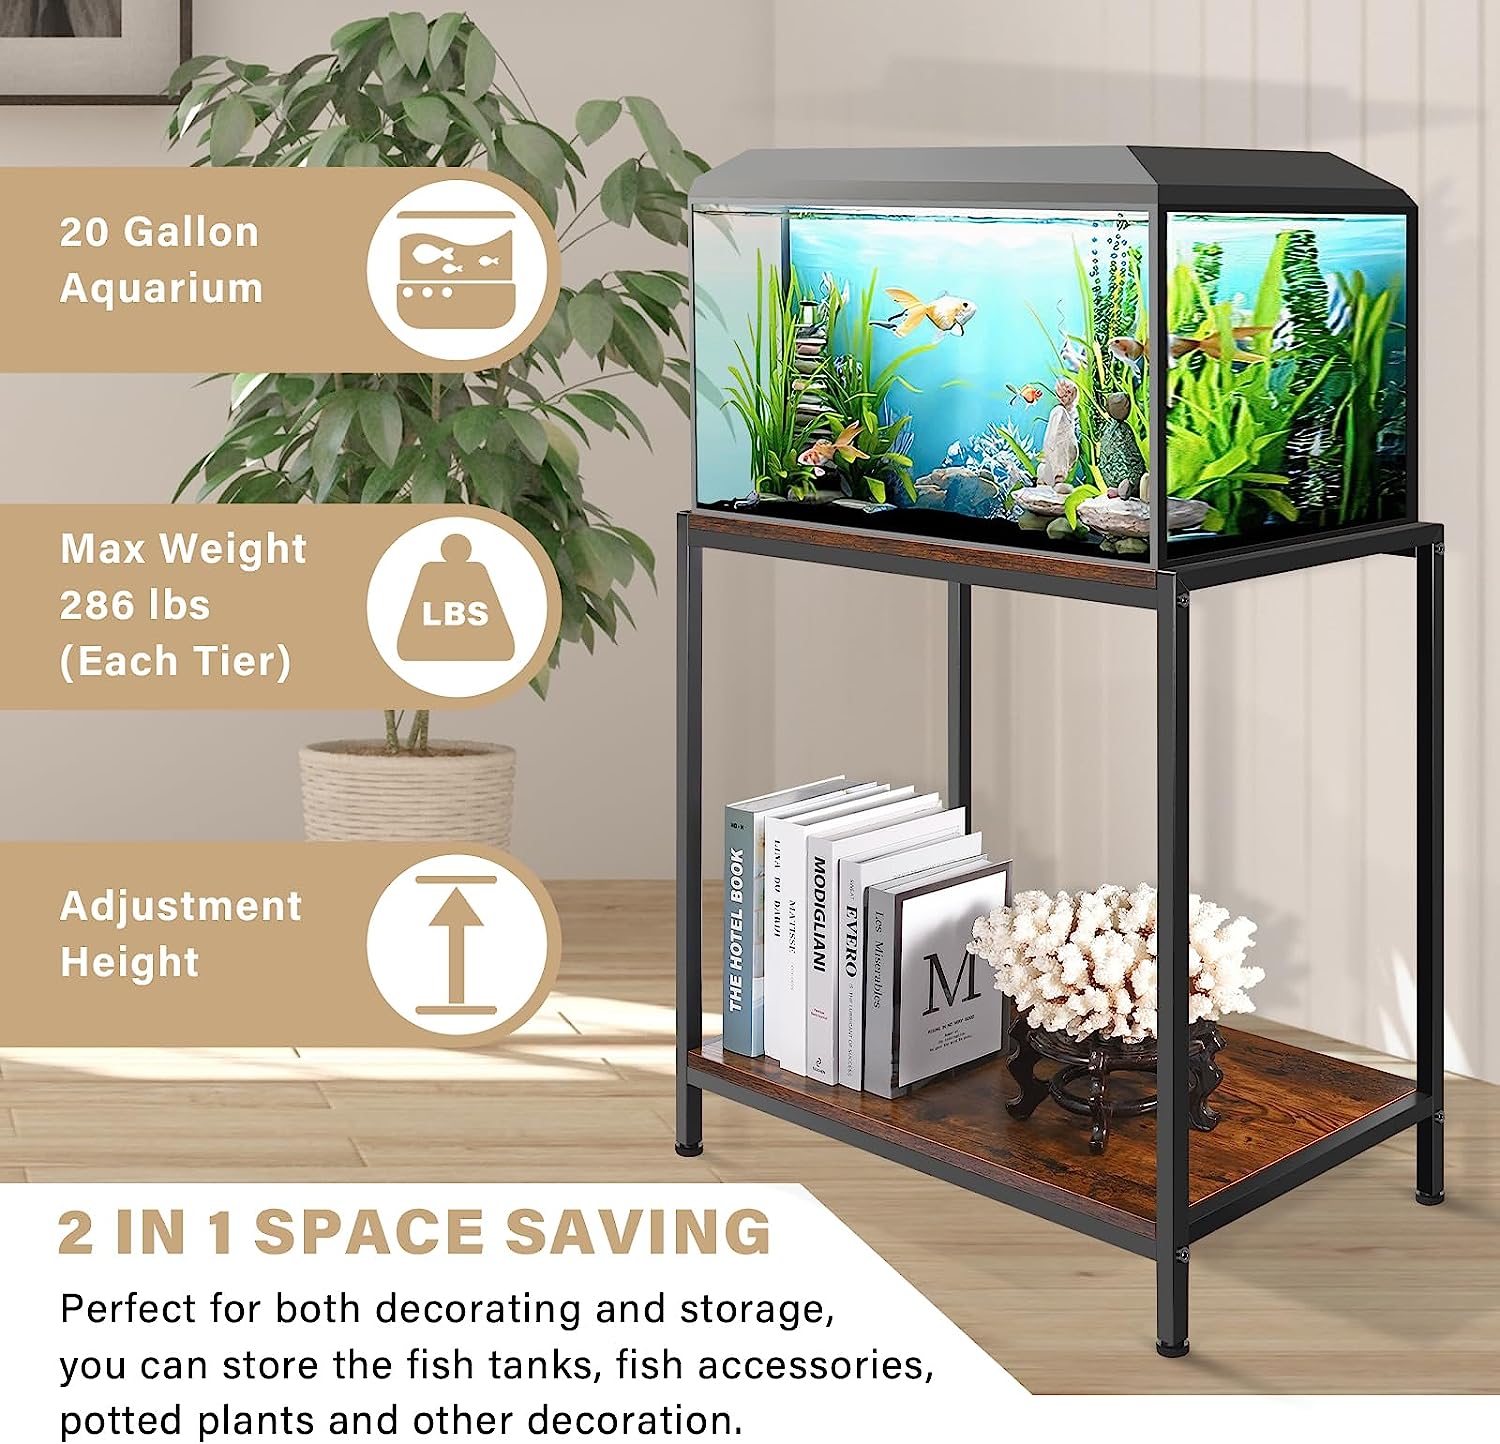 GADFISH Fish Tank Stand for up to 20 Gallon Aquarium, Metal Aquarium Stand for Fish Tank Accessories Storage, 2-tier Fish Tank Rack Shelf for Home Office, 27" L x 15.7" W, Tank not included